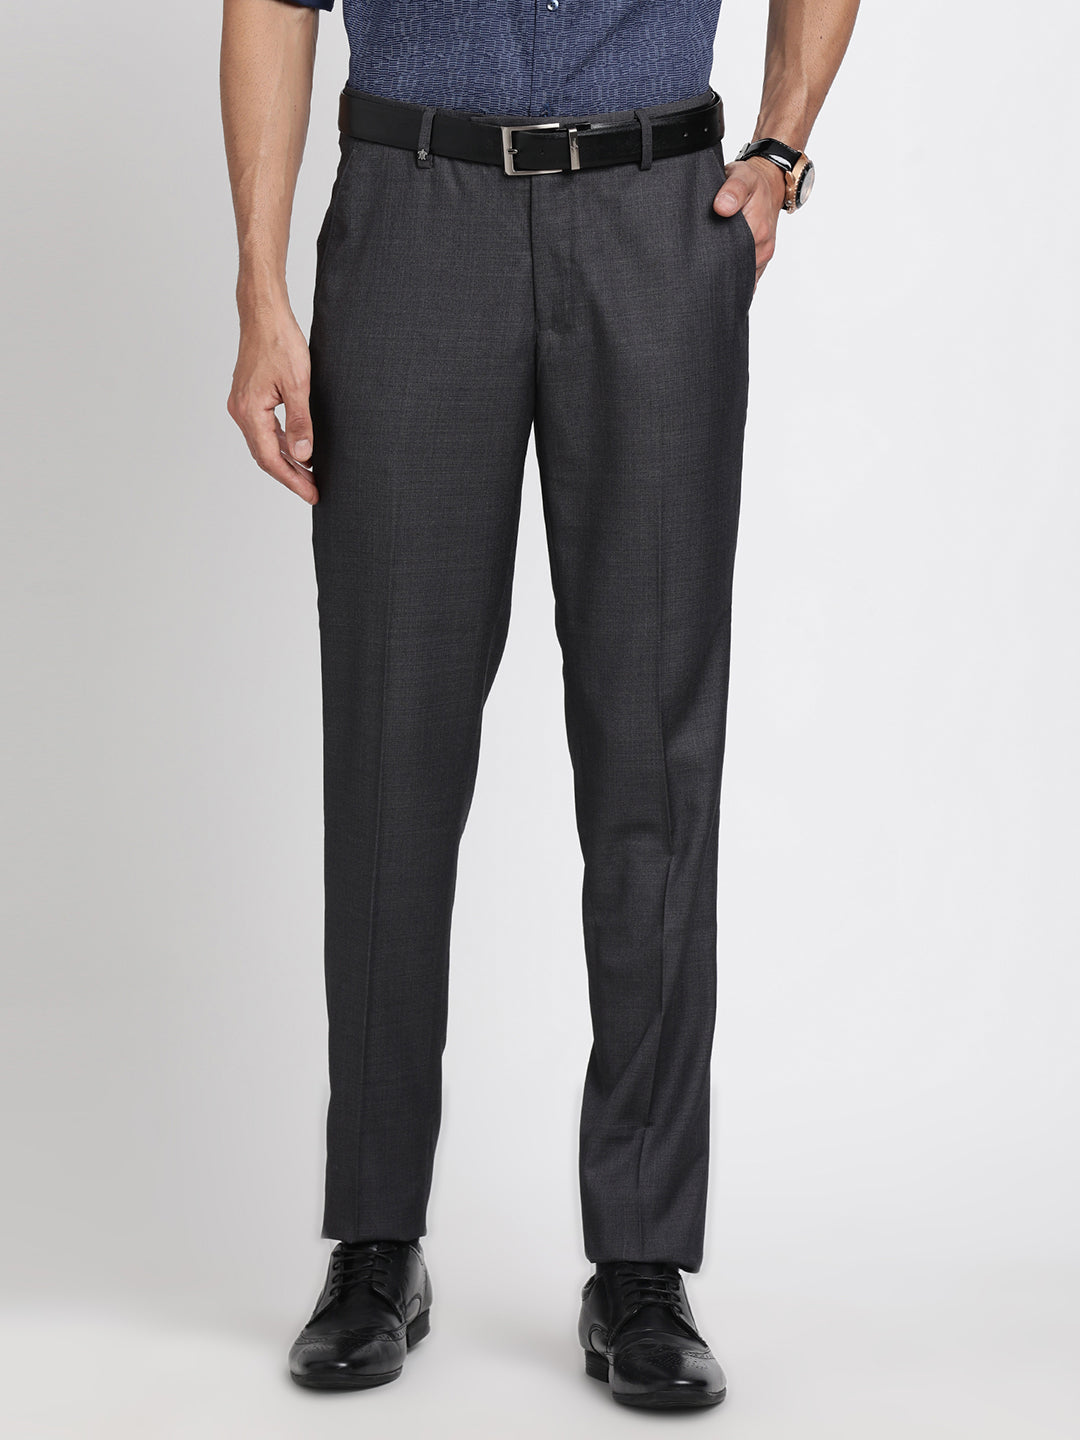 Terry Rayon Charcoal Plain Slim Fit Flat Front Formal Trouser